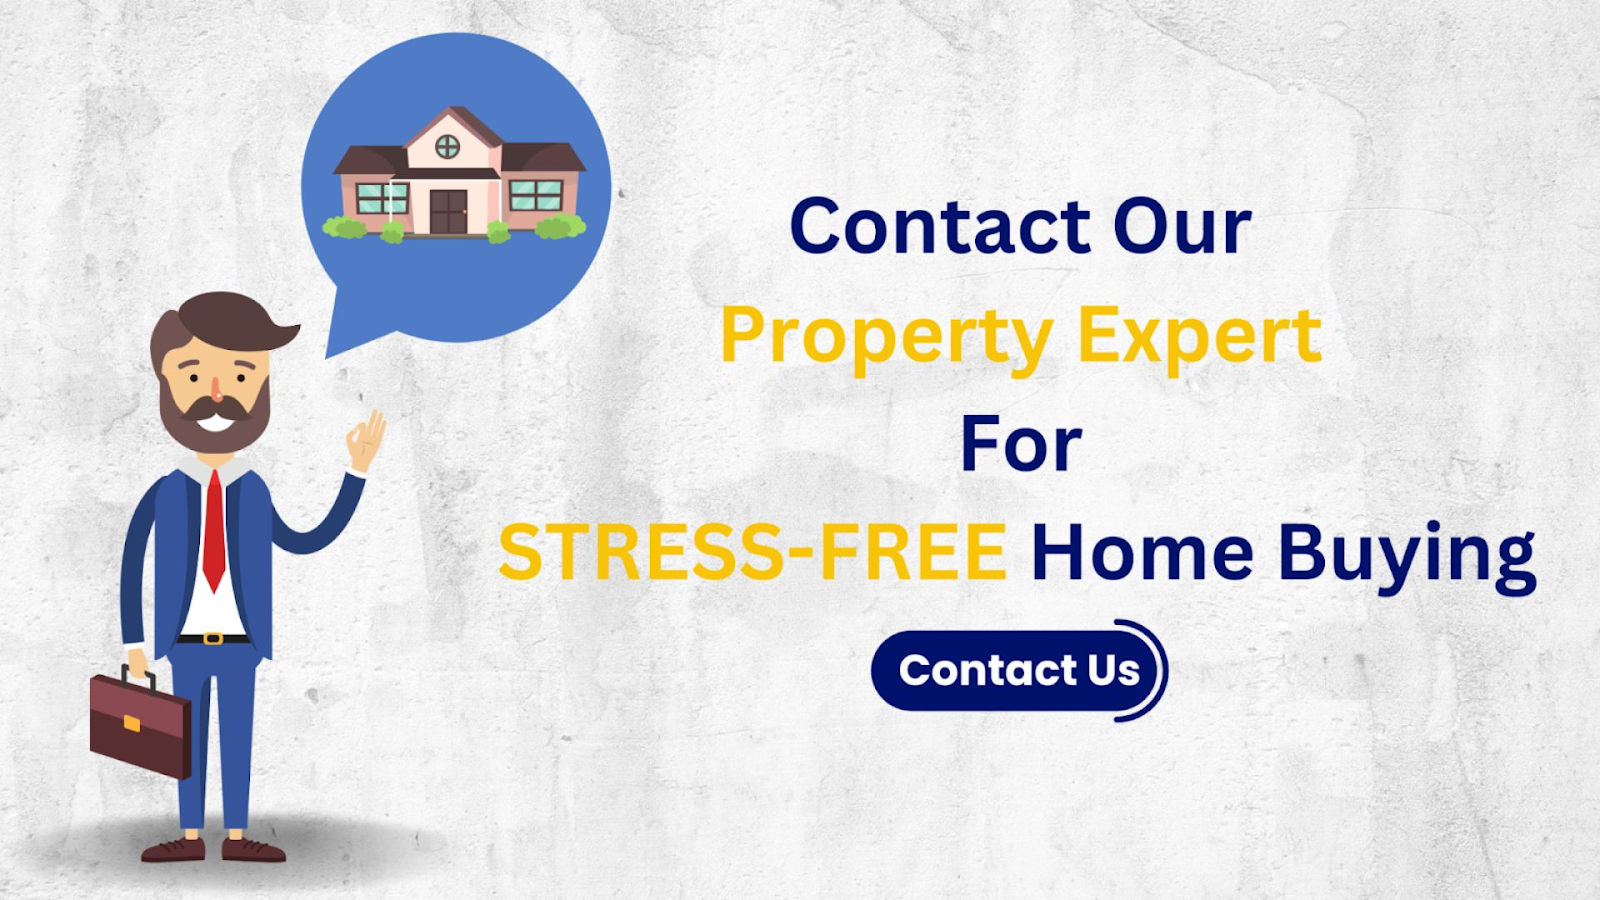 Get in touch with a property professional at PropertyCloud for a hassle-free house purchase.